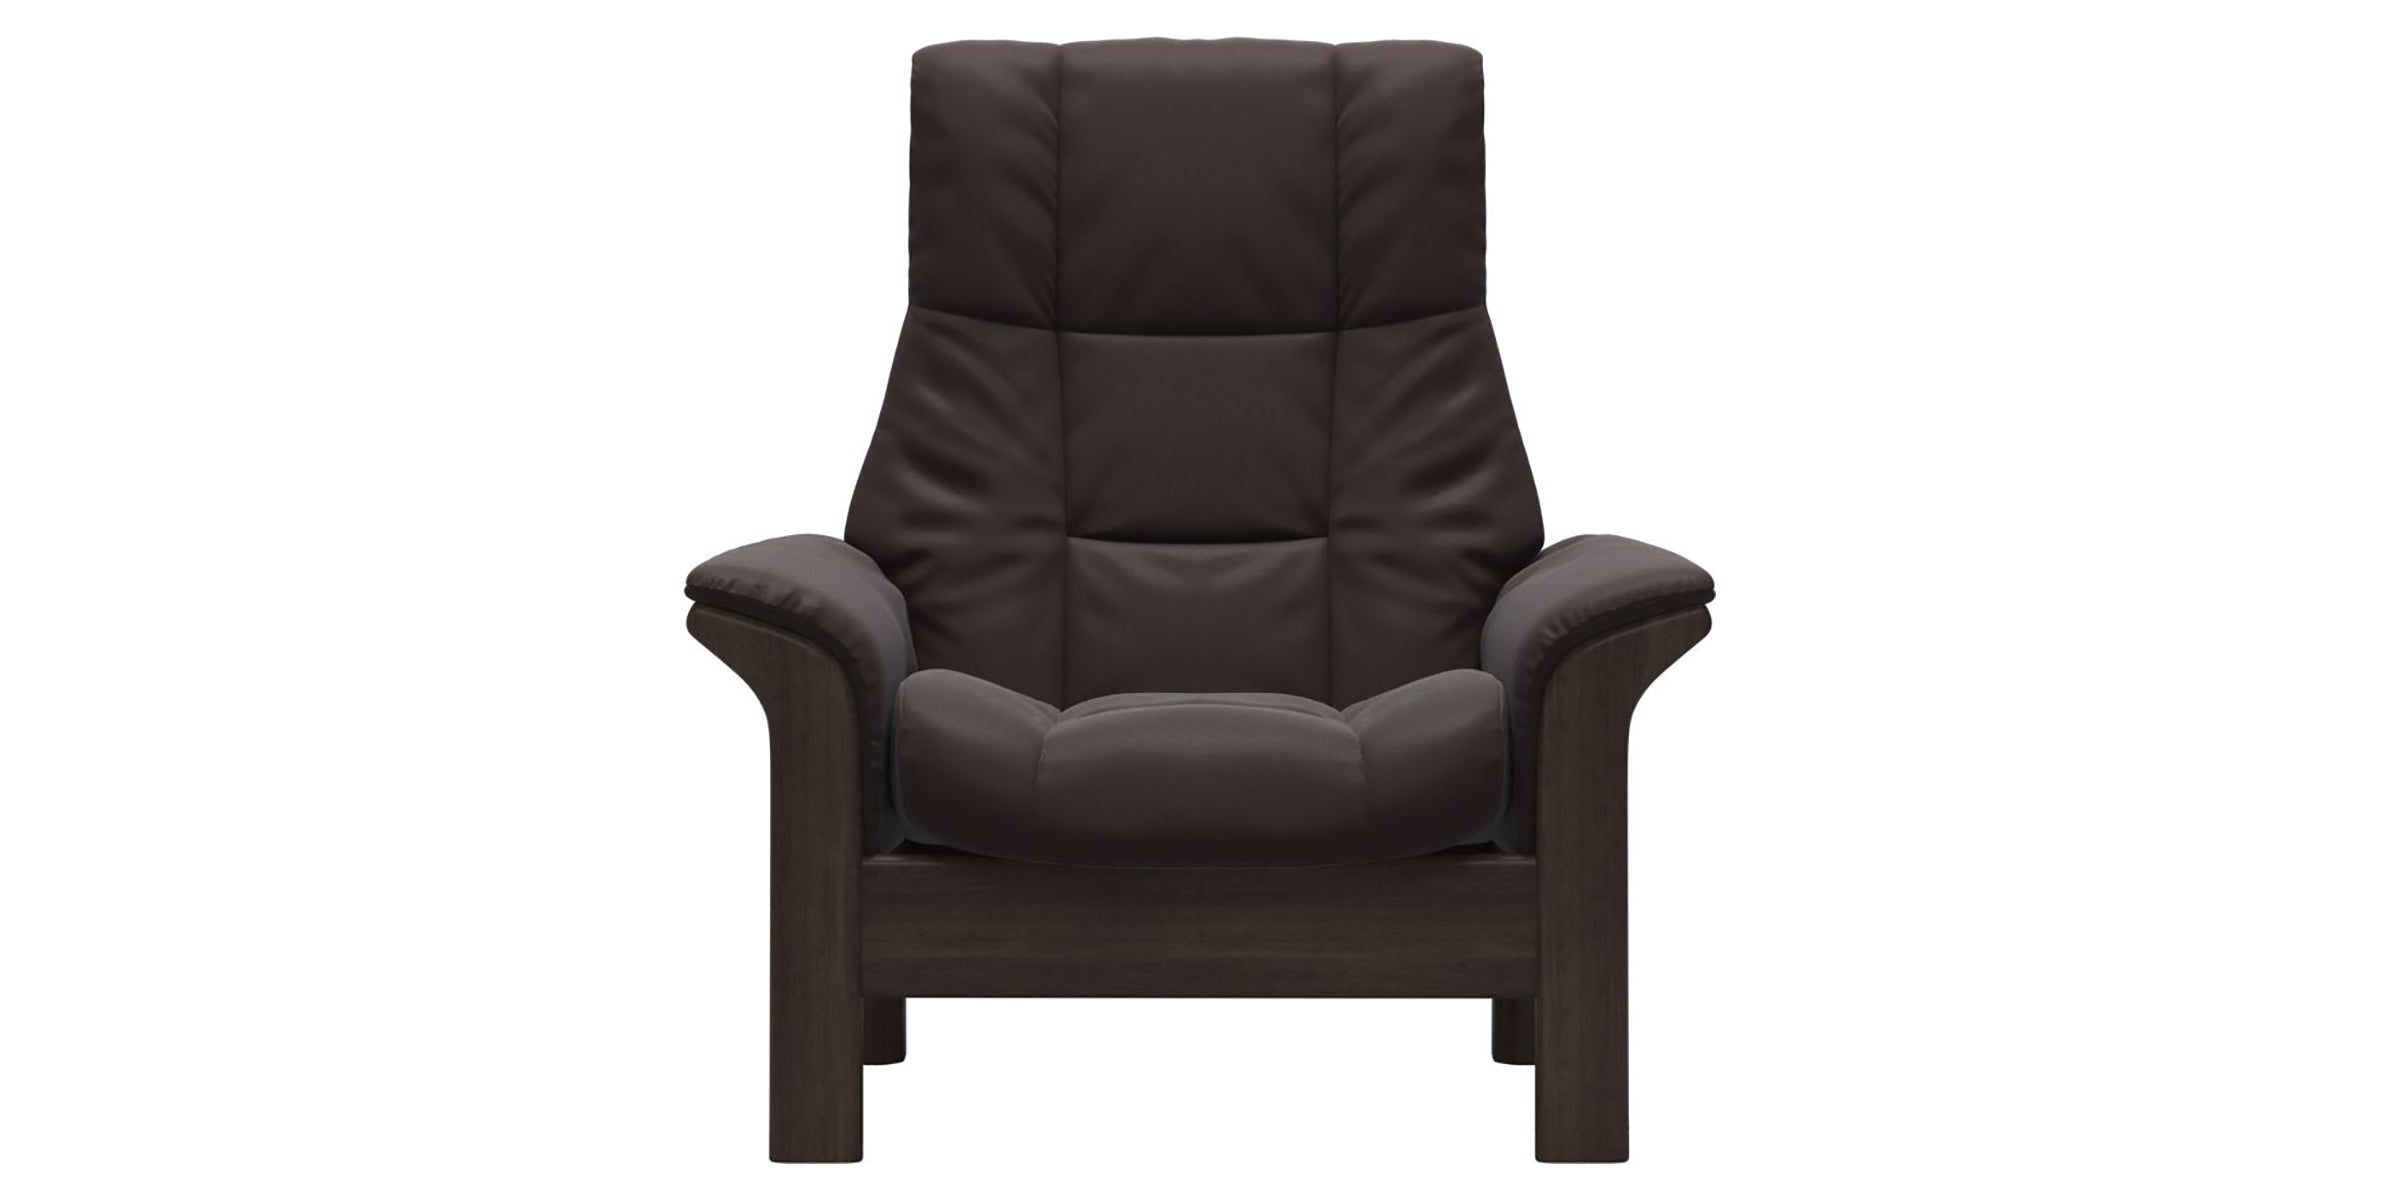 Paloma Leather Chocolate and Wenge Base | Stressless Windsor High Back Chair | Valley Ridge Furniture